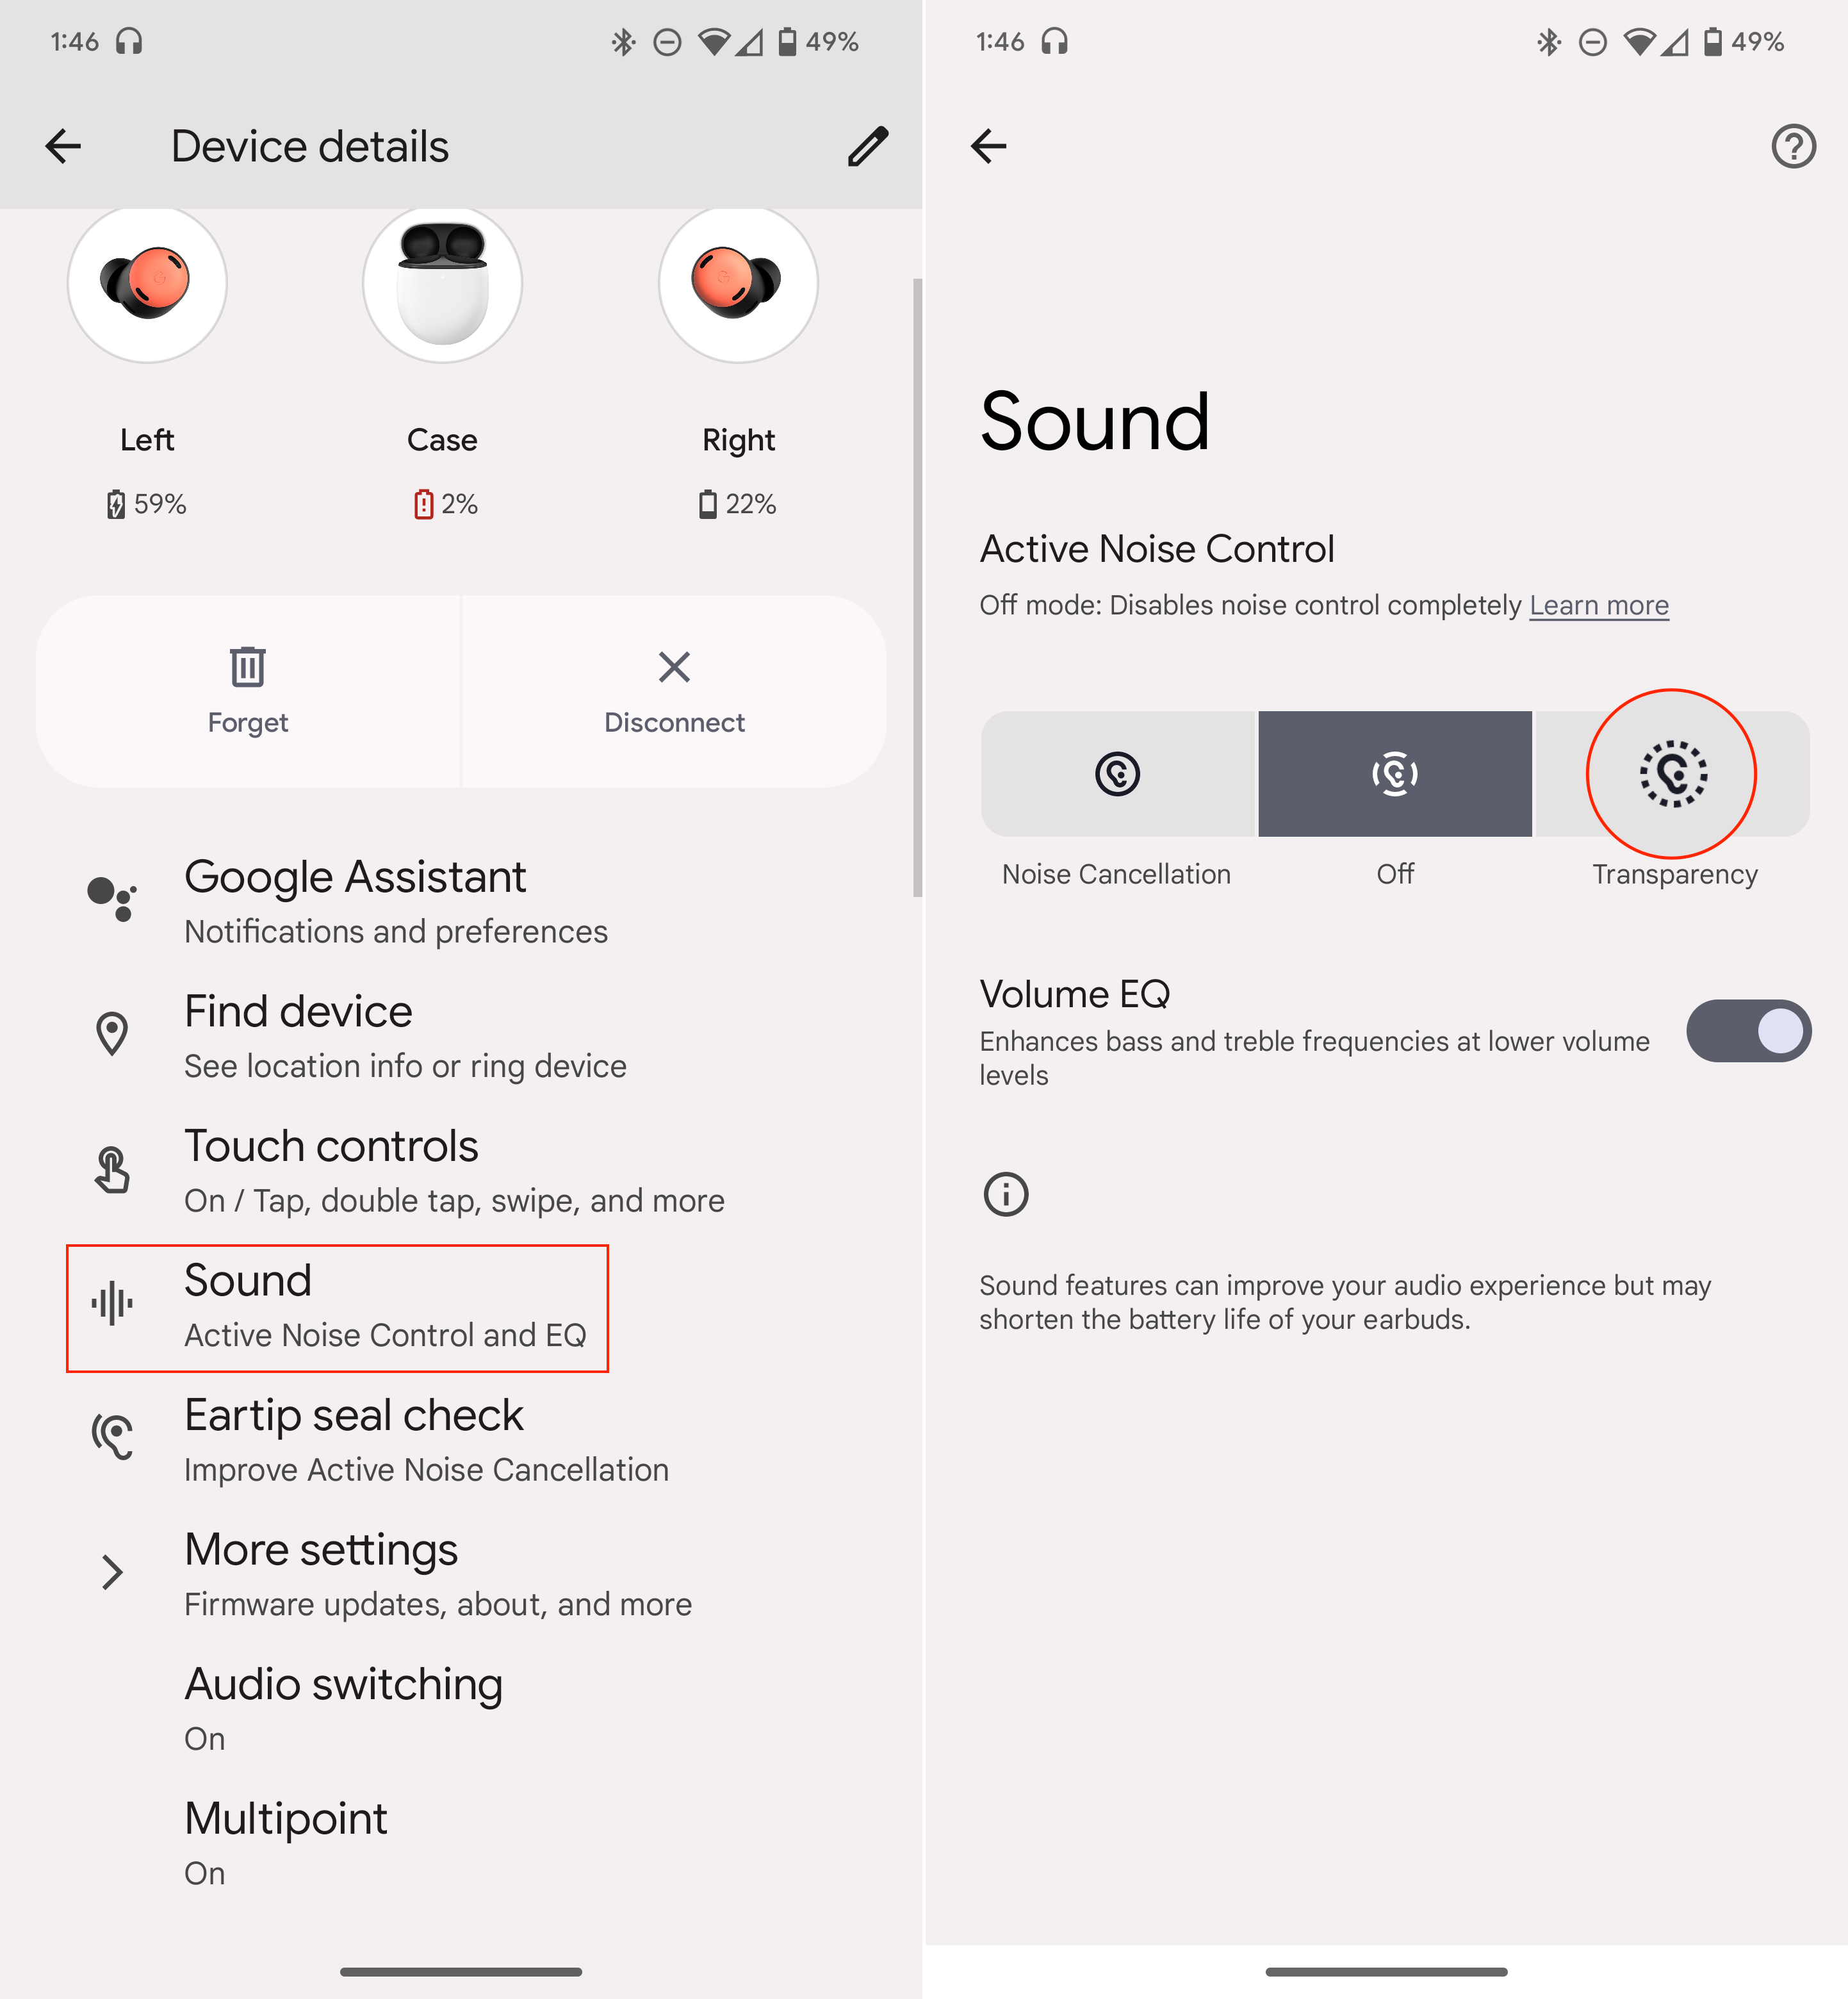 Manually enable Transparency mode on the Pixel Buds Pro